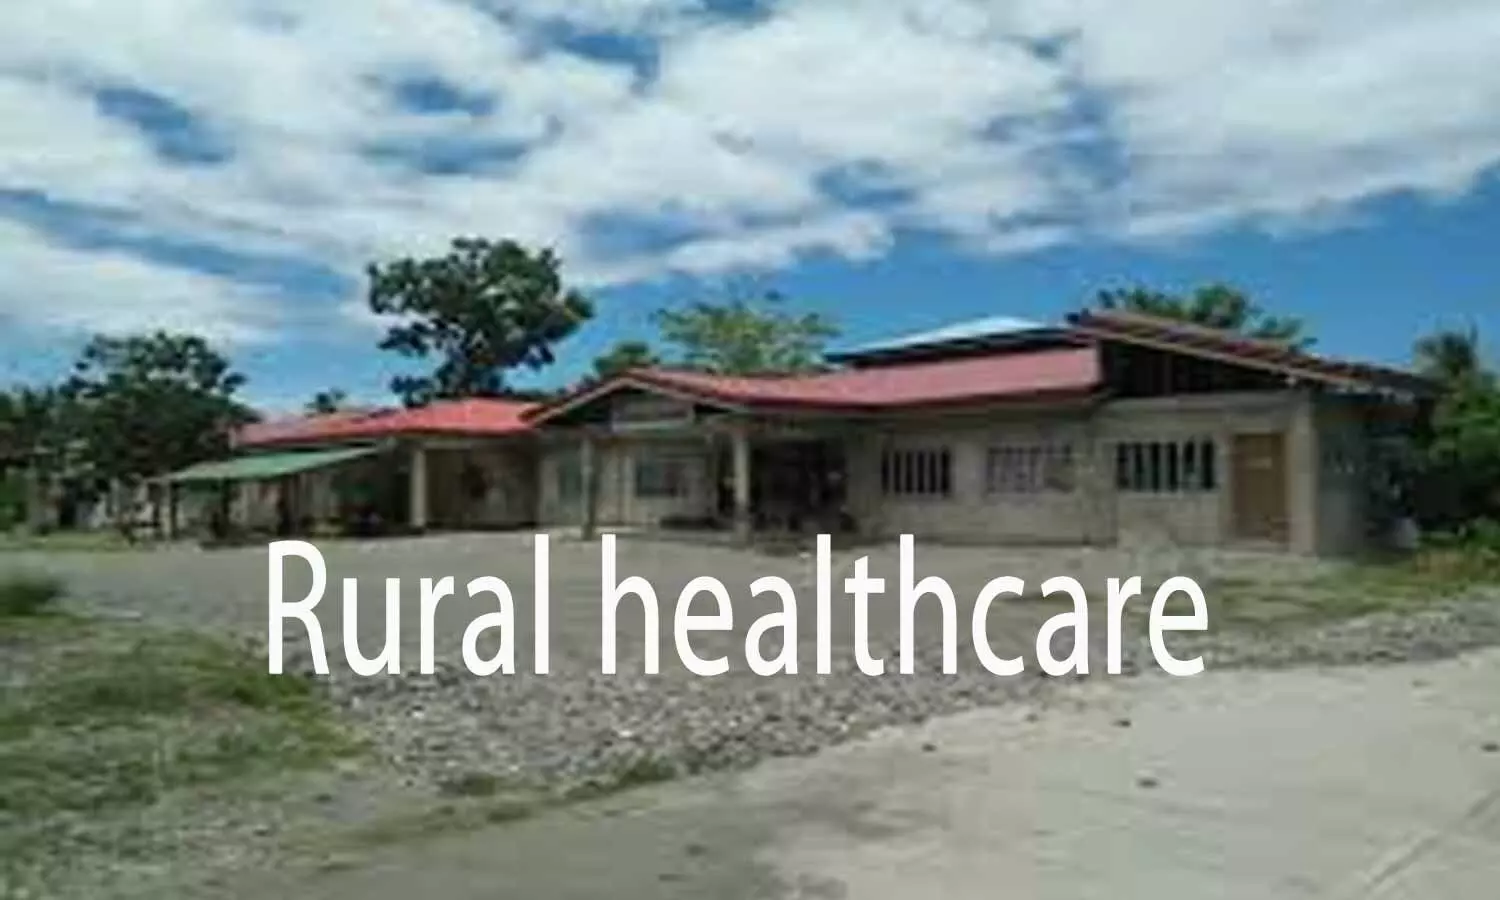 Andhra Pradesh to invest in rural healthcare; Rs 16,200 crore allocated to set up 10,000 clinics